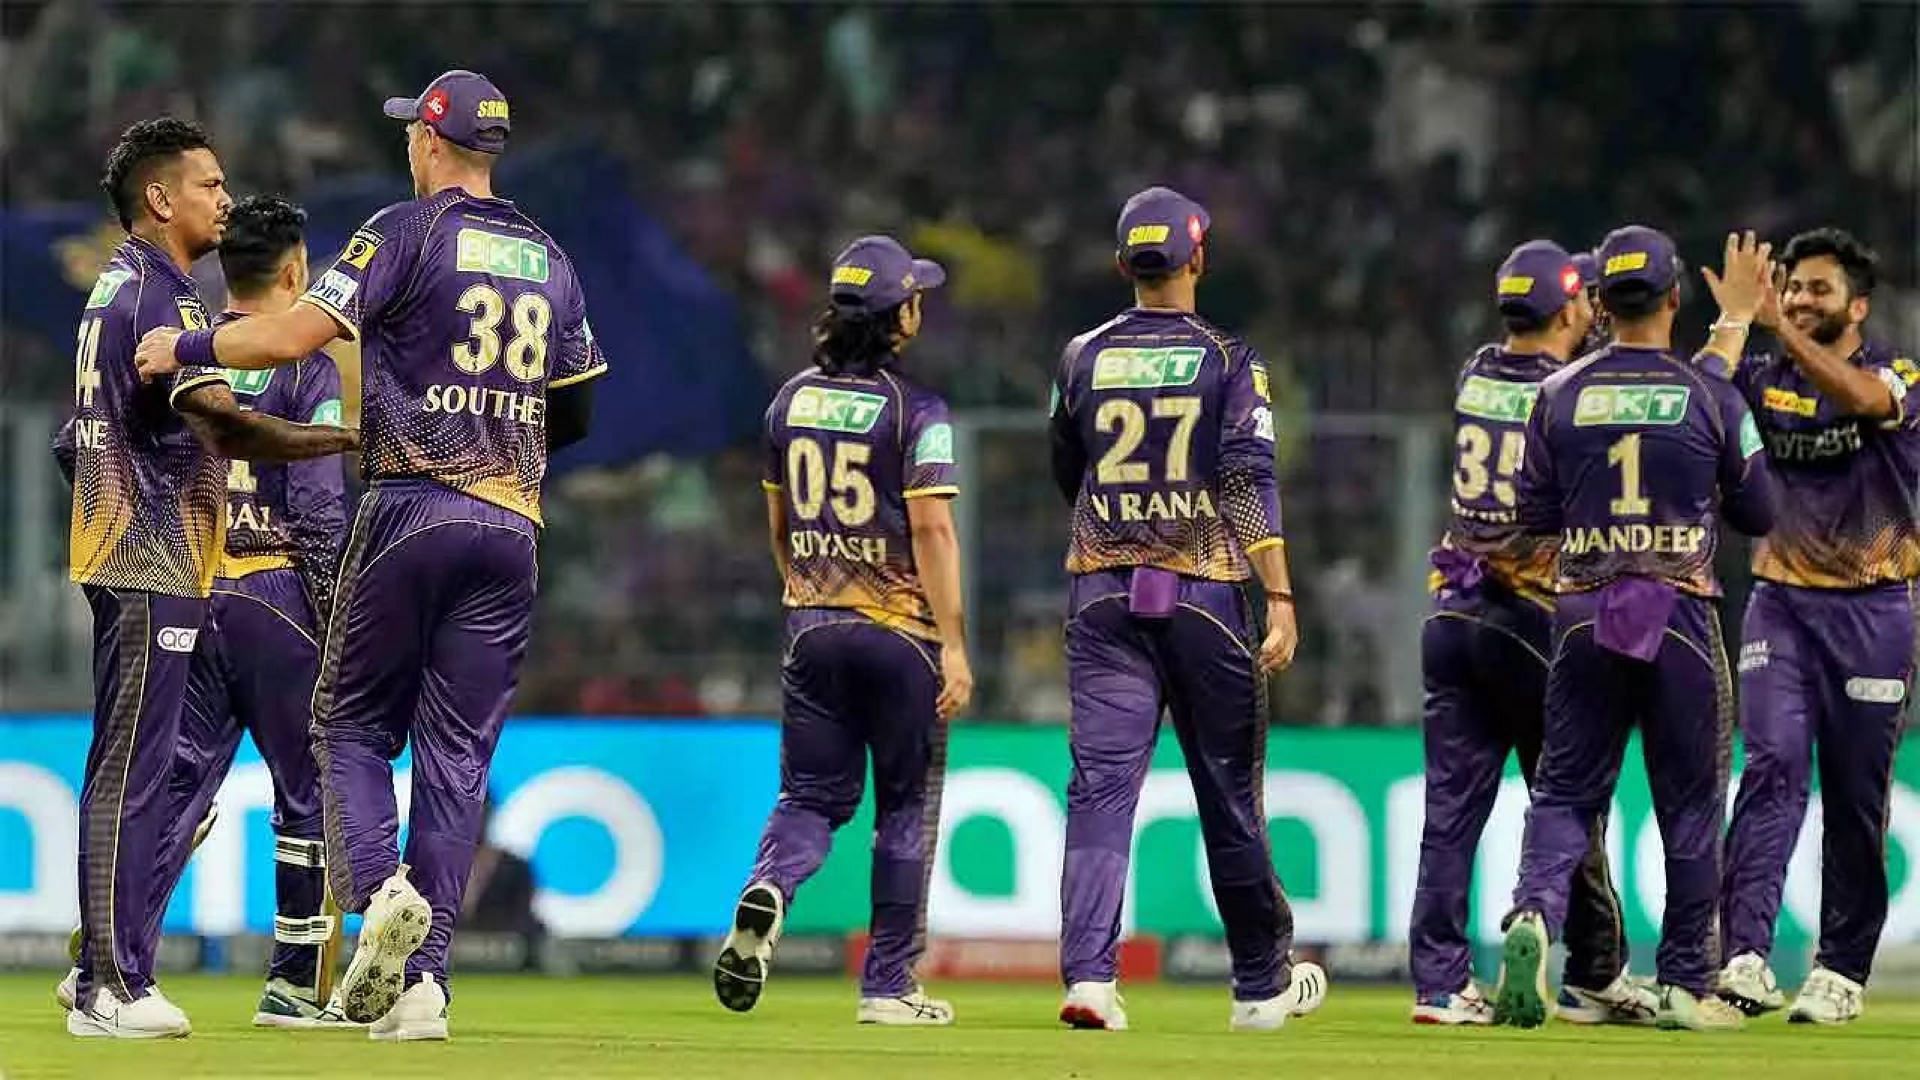 KKR continued their miserable run in IPL 2023 with crushing defeat to CSK